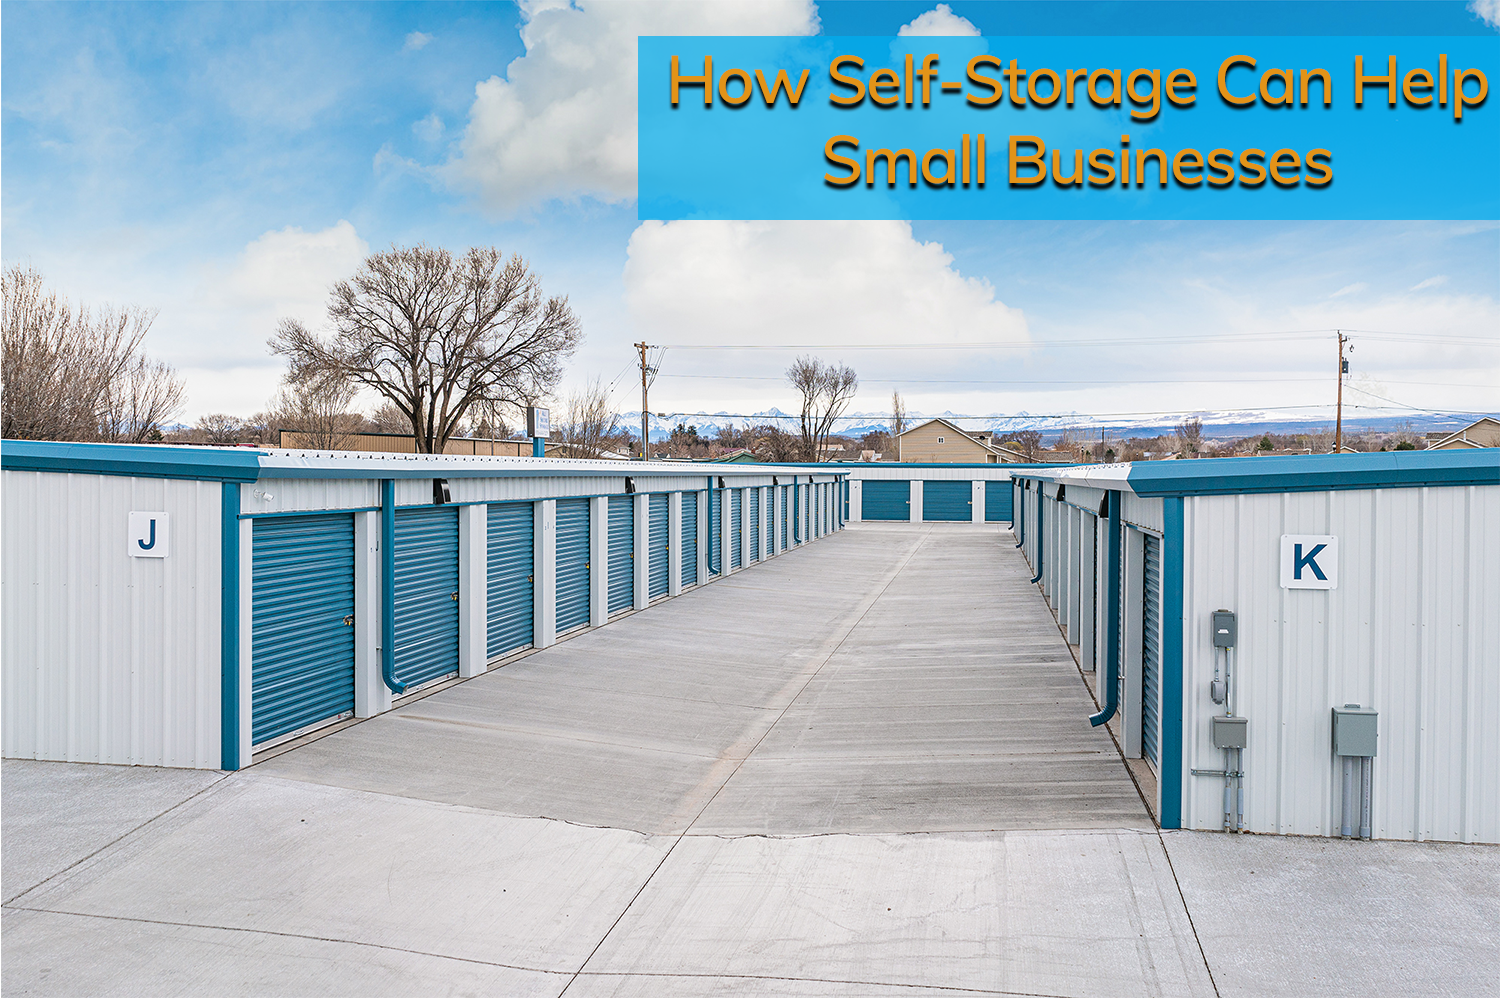 All Secure Storage units ready to help small businesses.